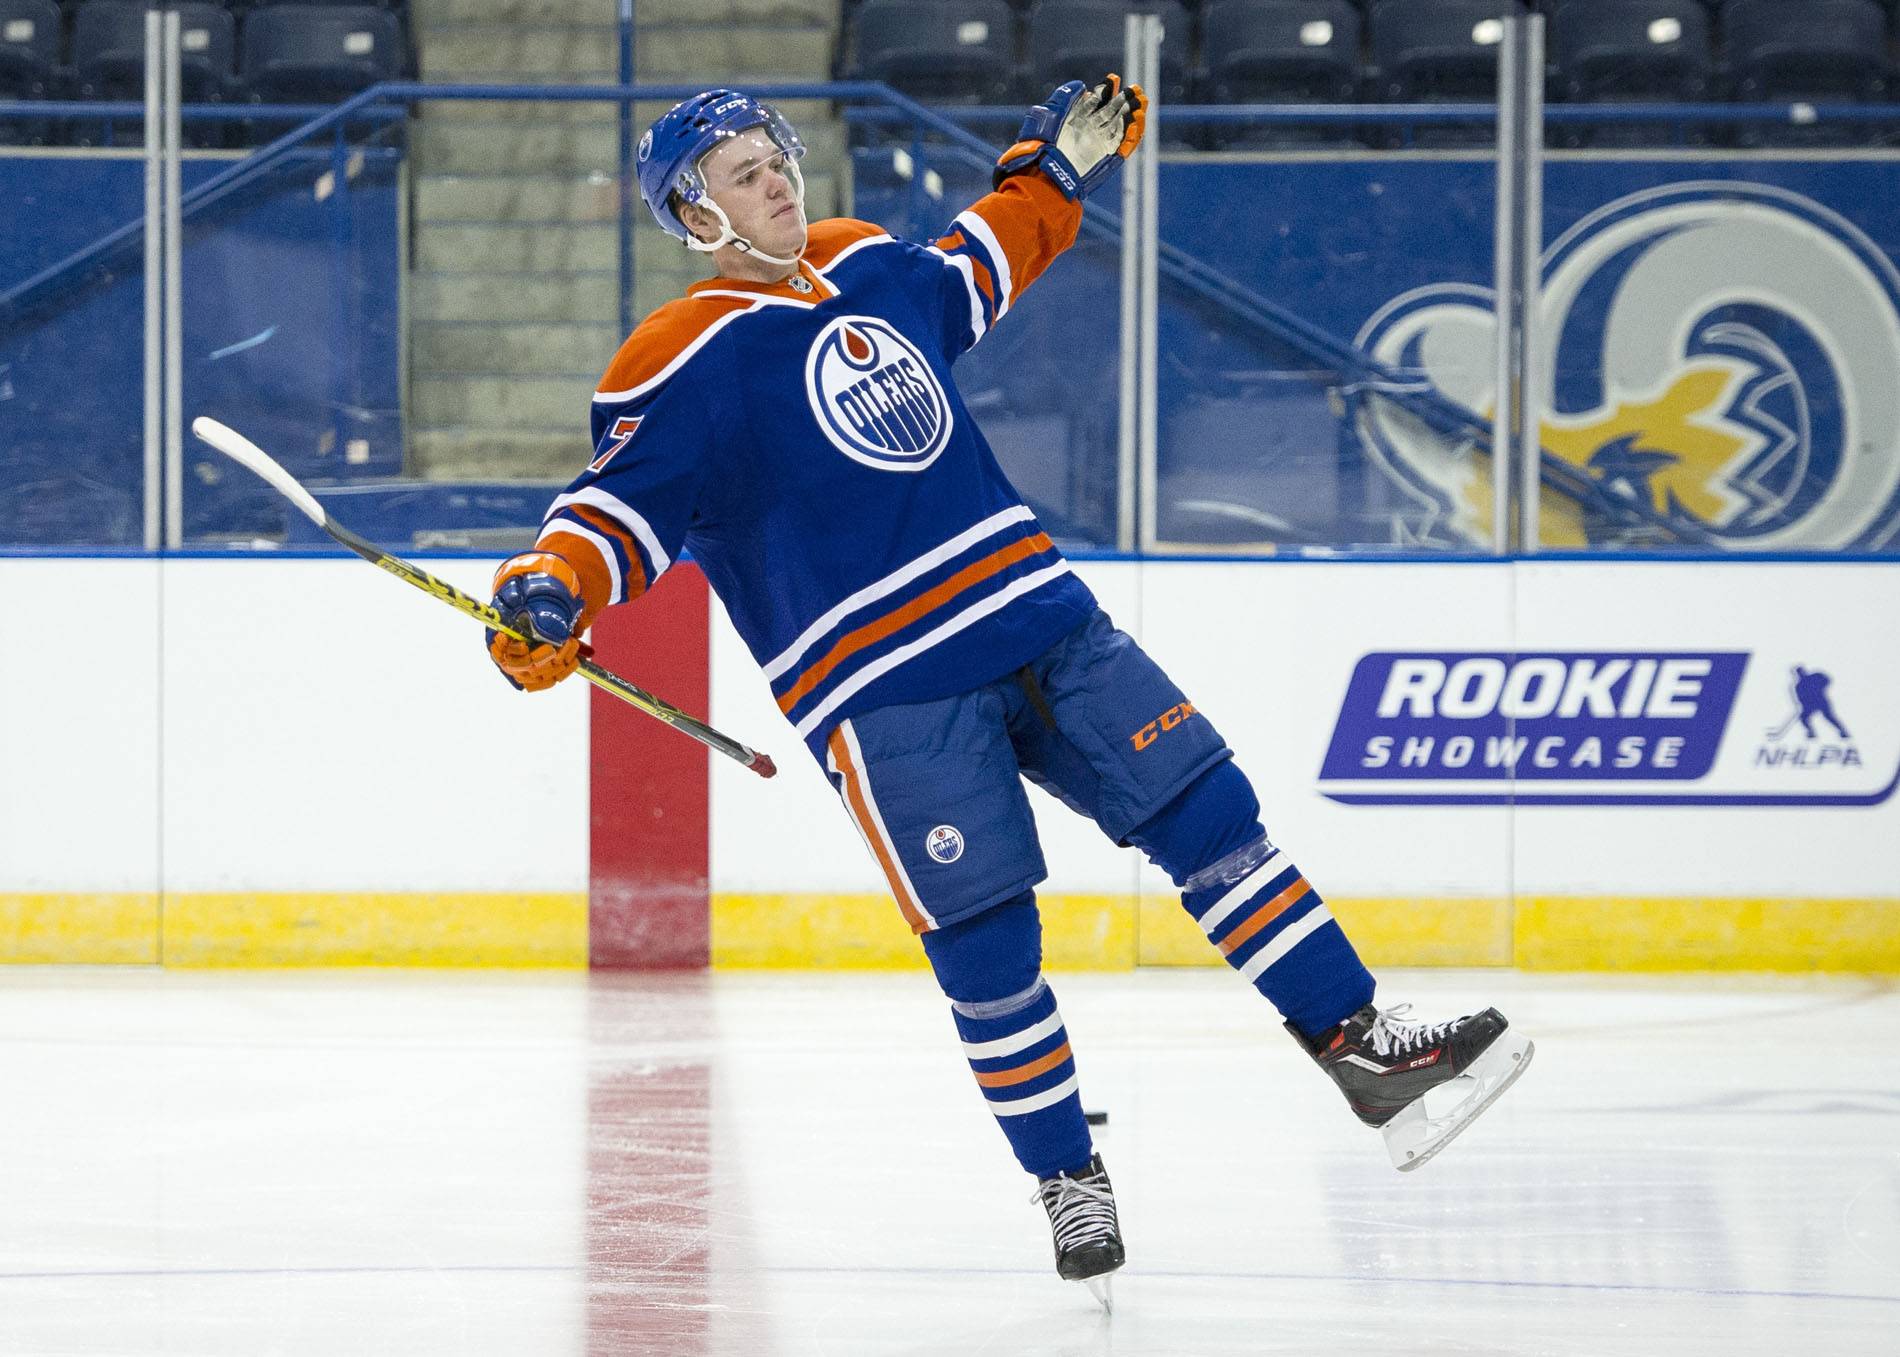 Excitement builds for release of Connor McDavid's NHL rookie card